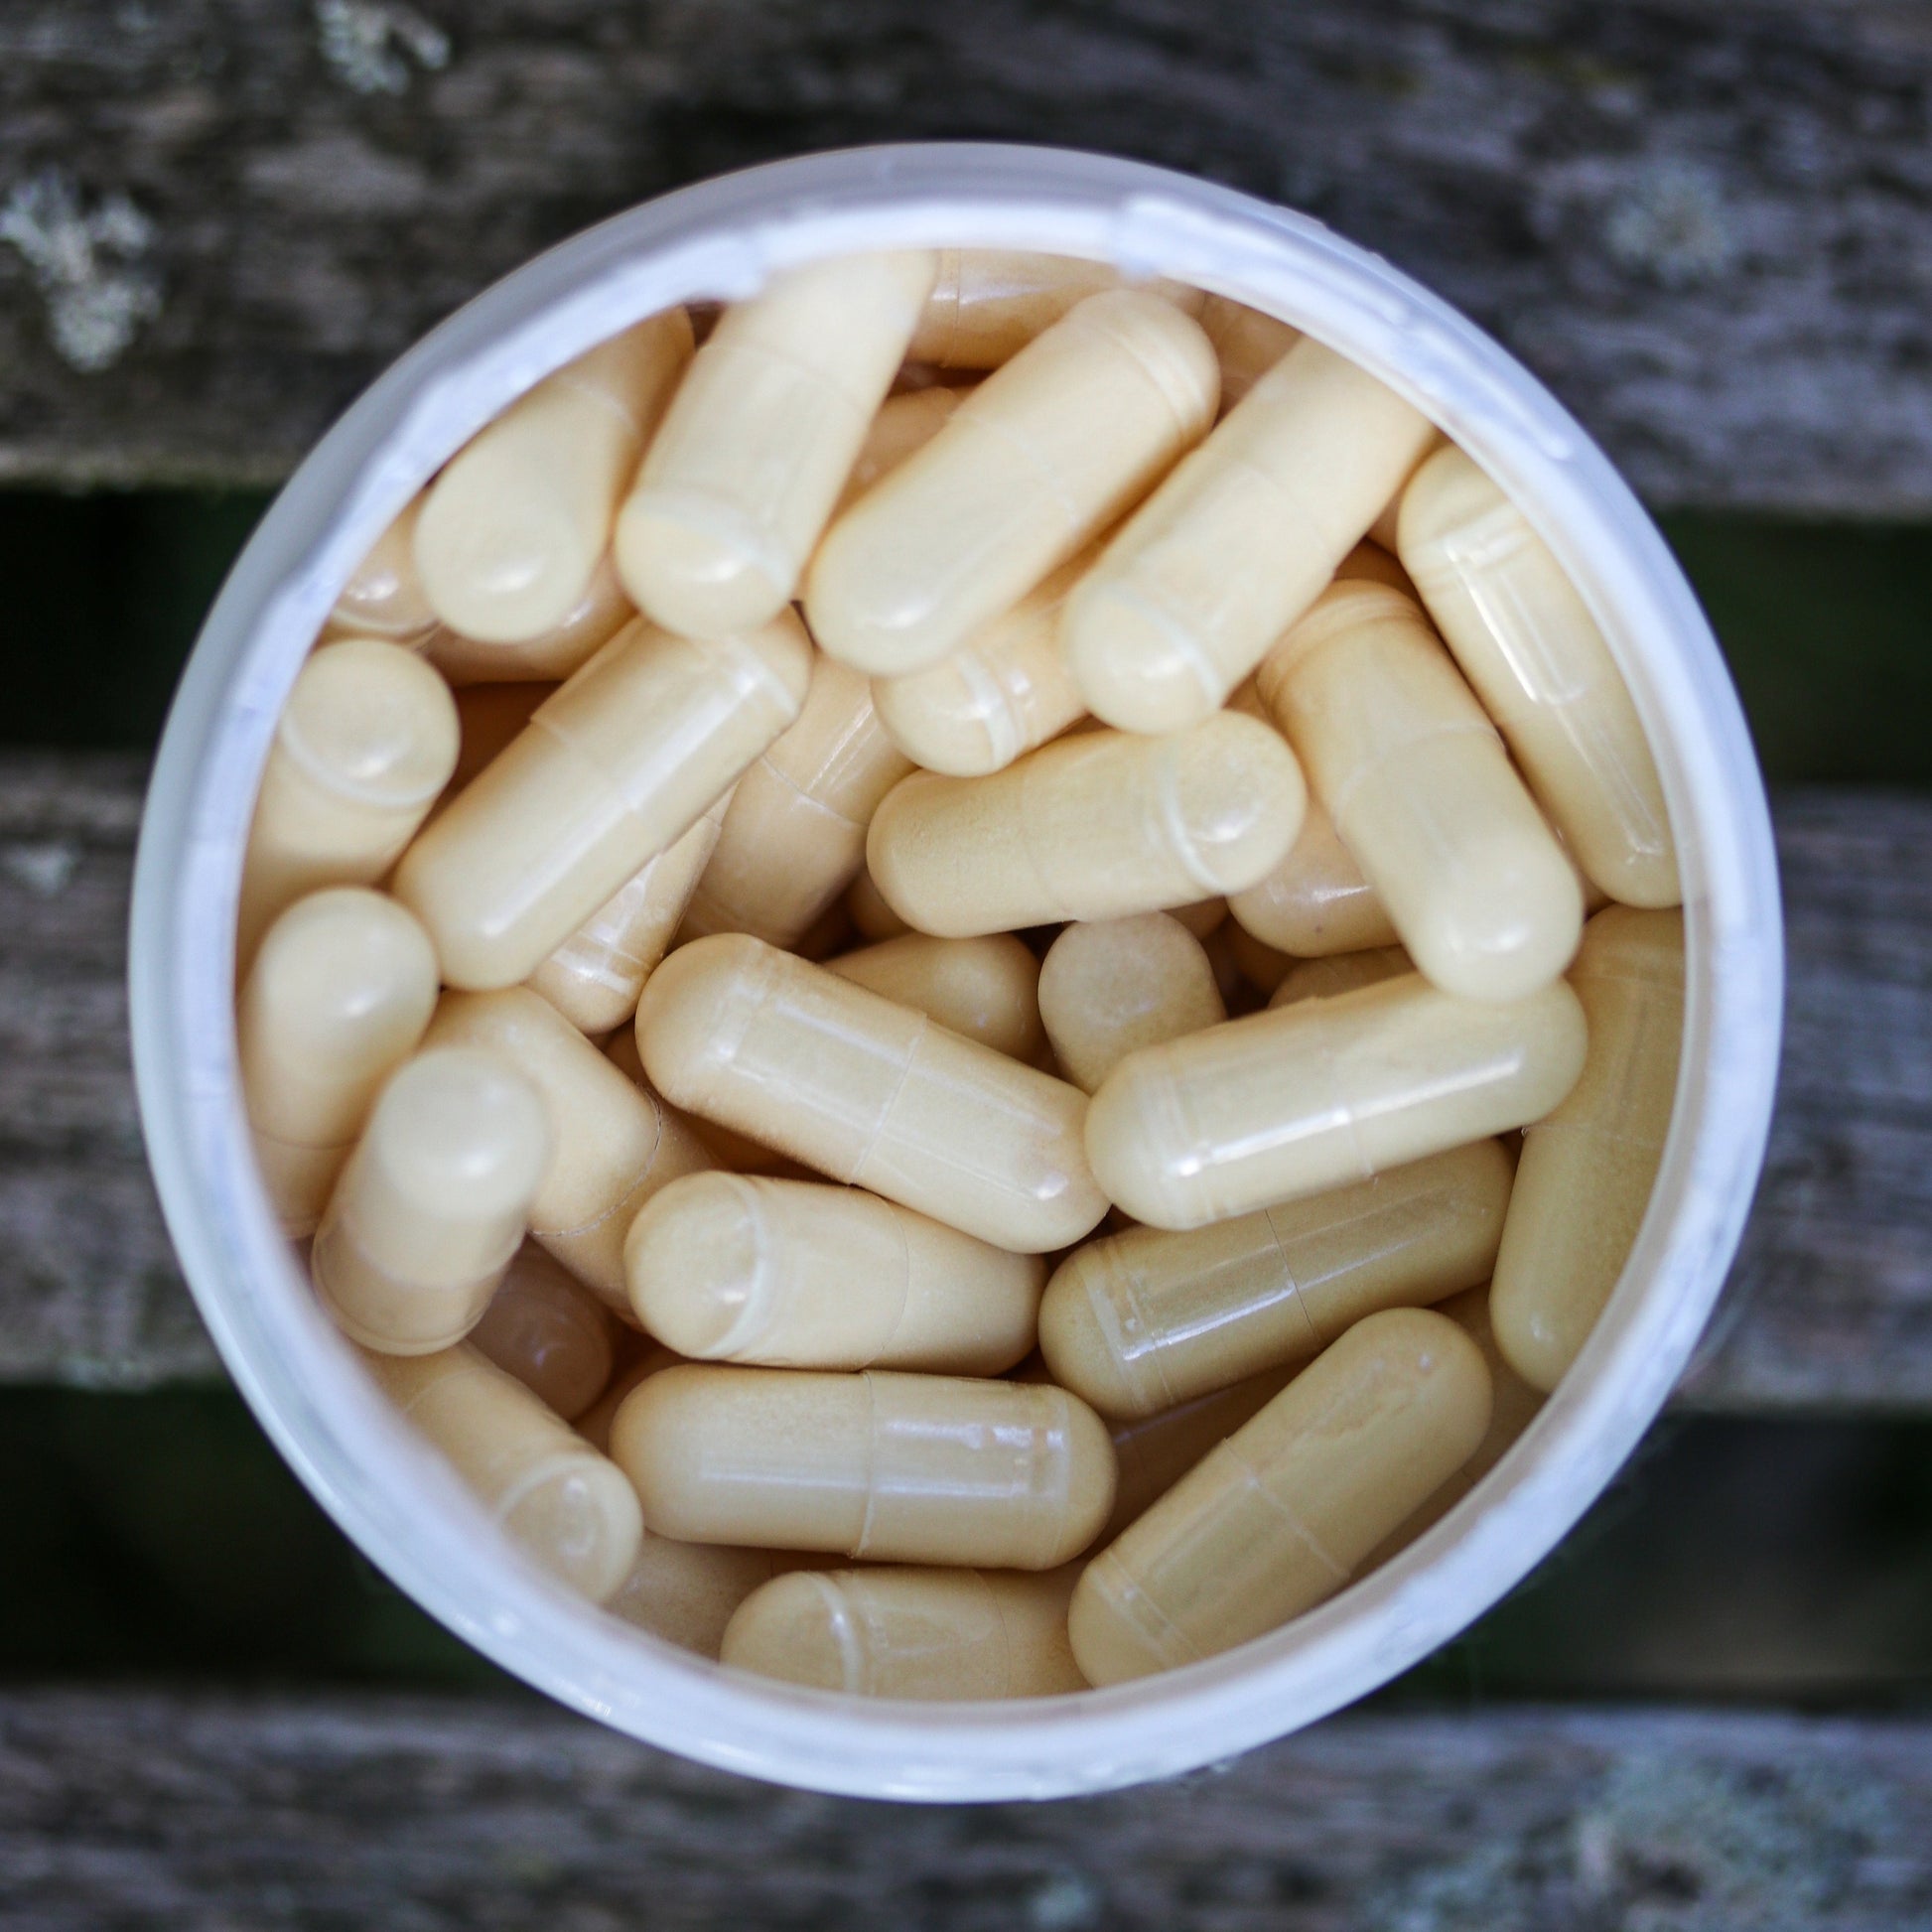 Capsules of powdered omega 3 fish oil by Pawsomely Healthy 